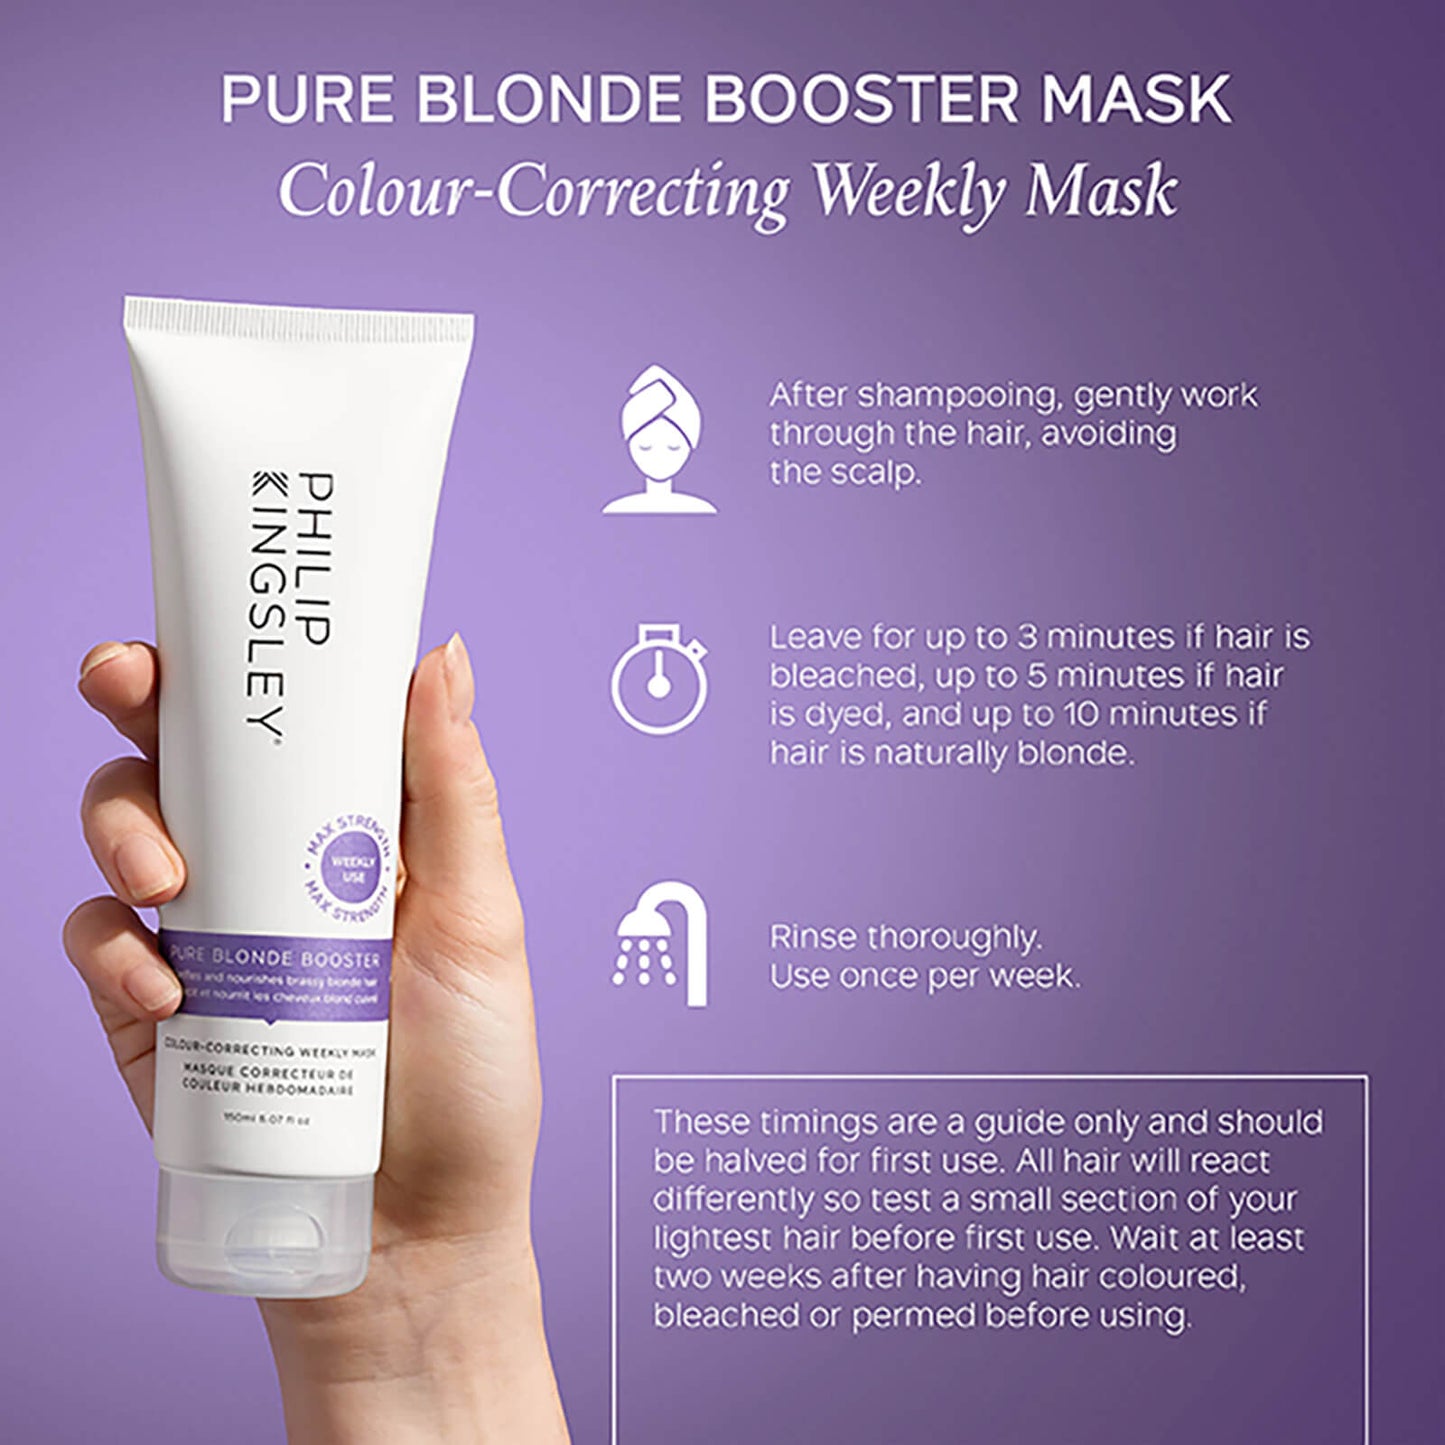 PURE BLONDE BOOSTER Colour-Correcting Weekly Mask